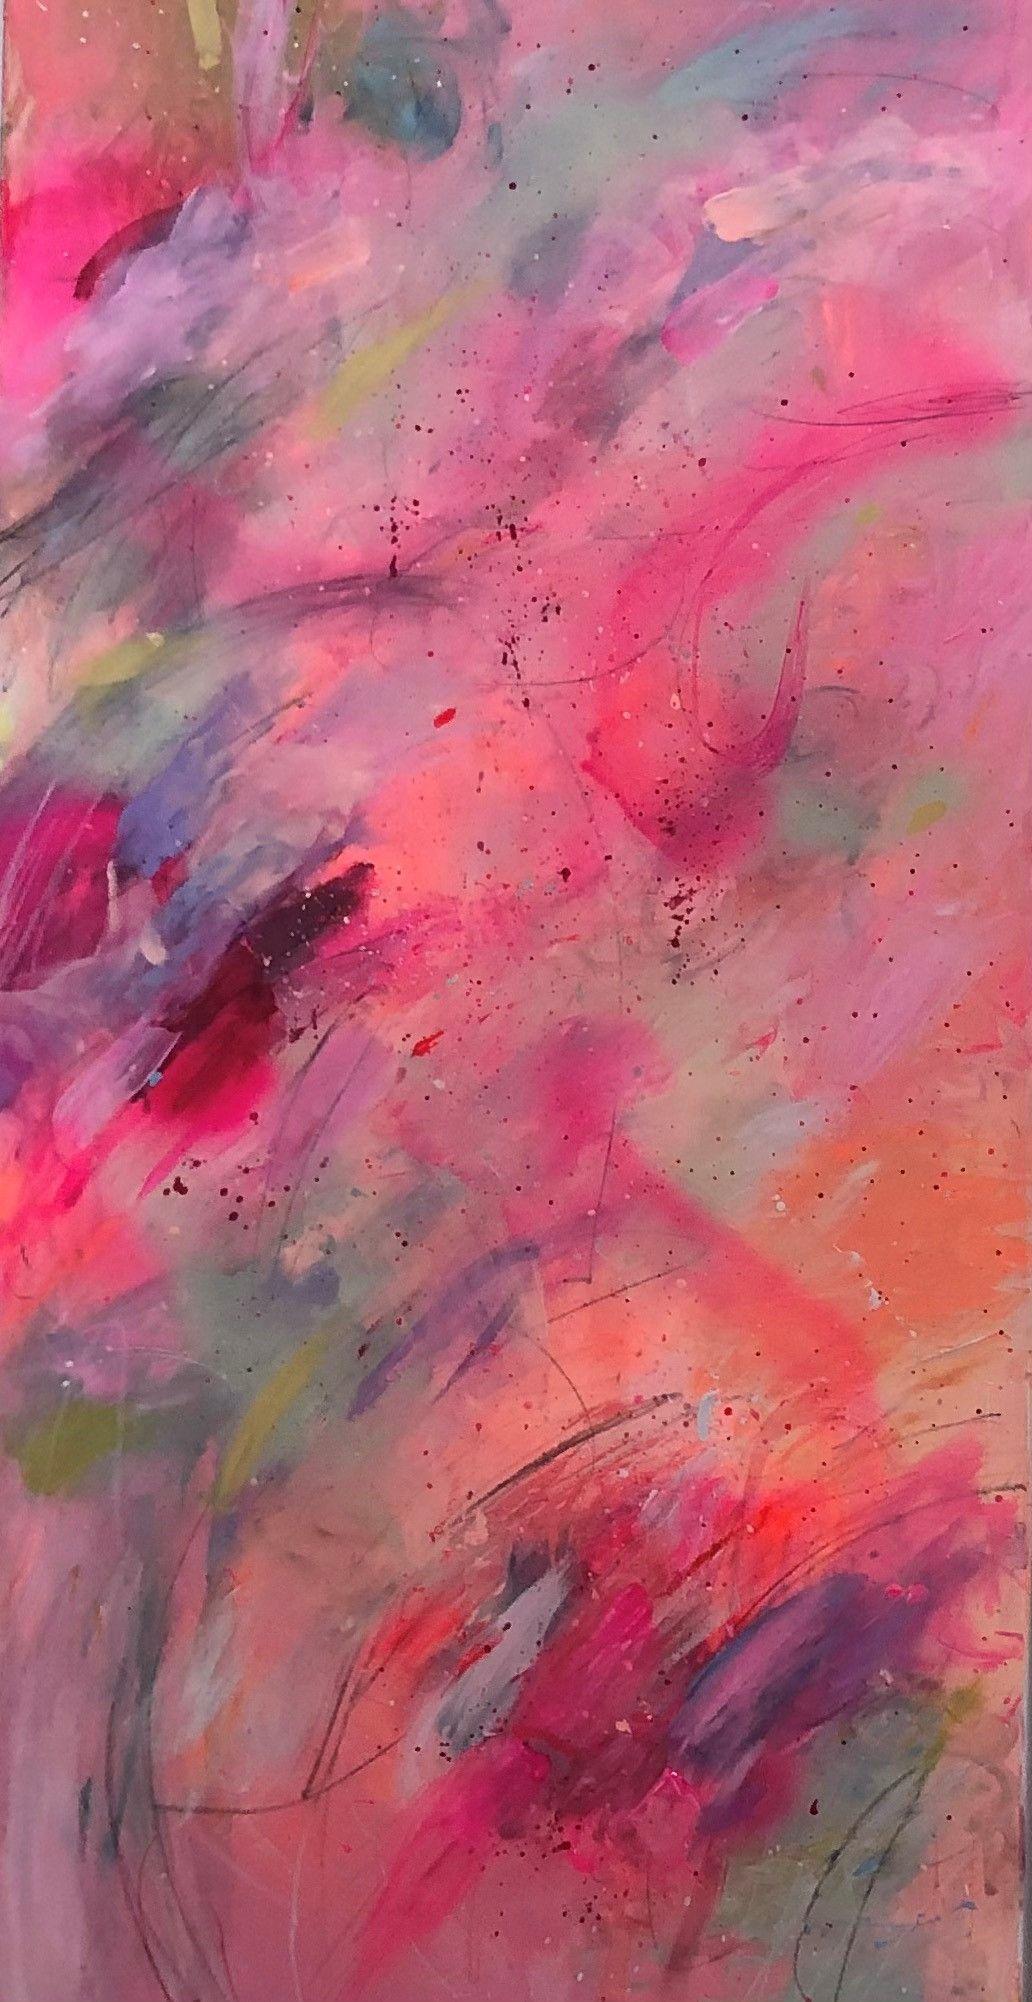 This three painting abstract art hangs together as one piece. It was created during a Northeastern snow storm. The bright colors have lifted my spirits, and hopefully yours too.   The title is from a 70's love song. The colors are soft pastels along